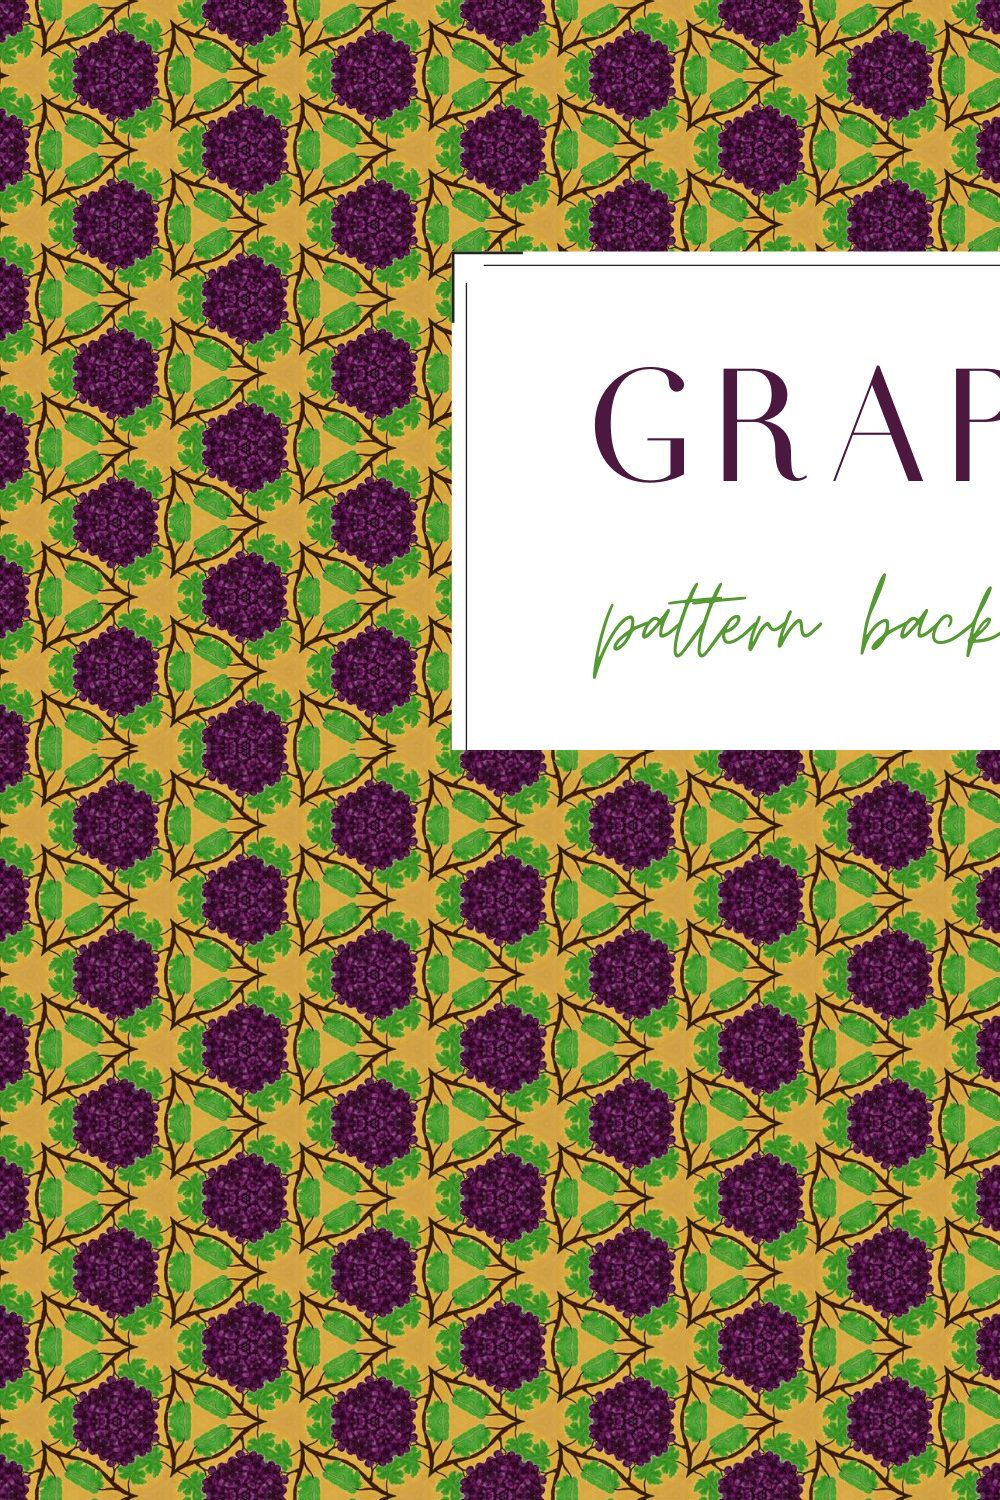 Grapes pattern background pinterest preview image.